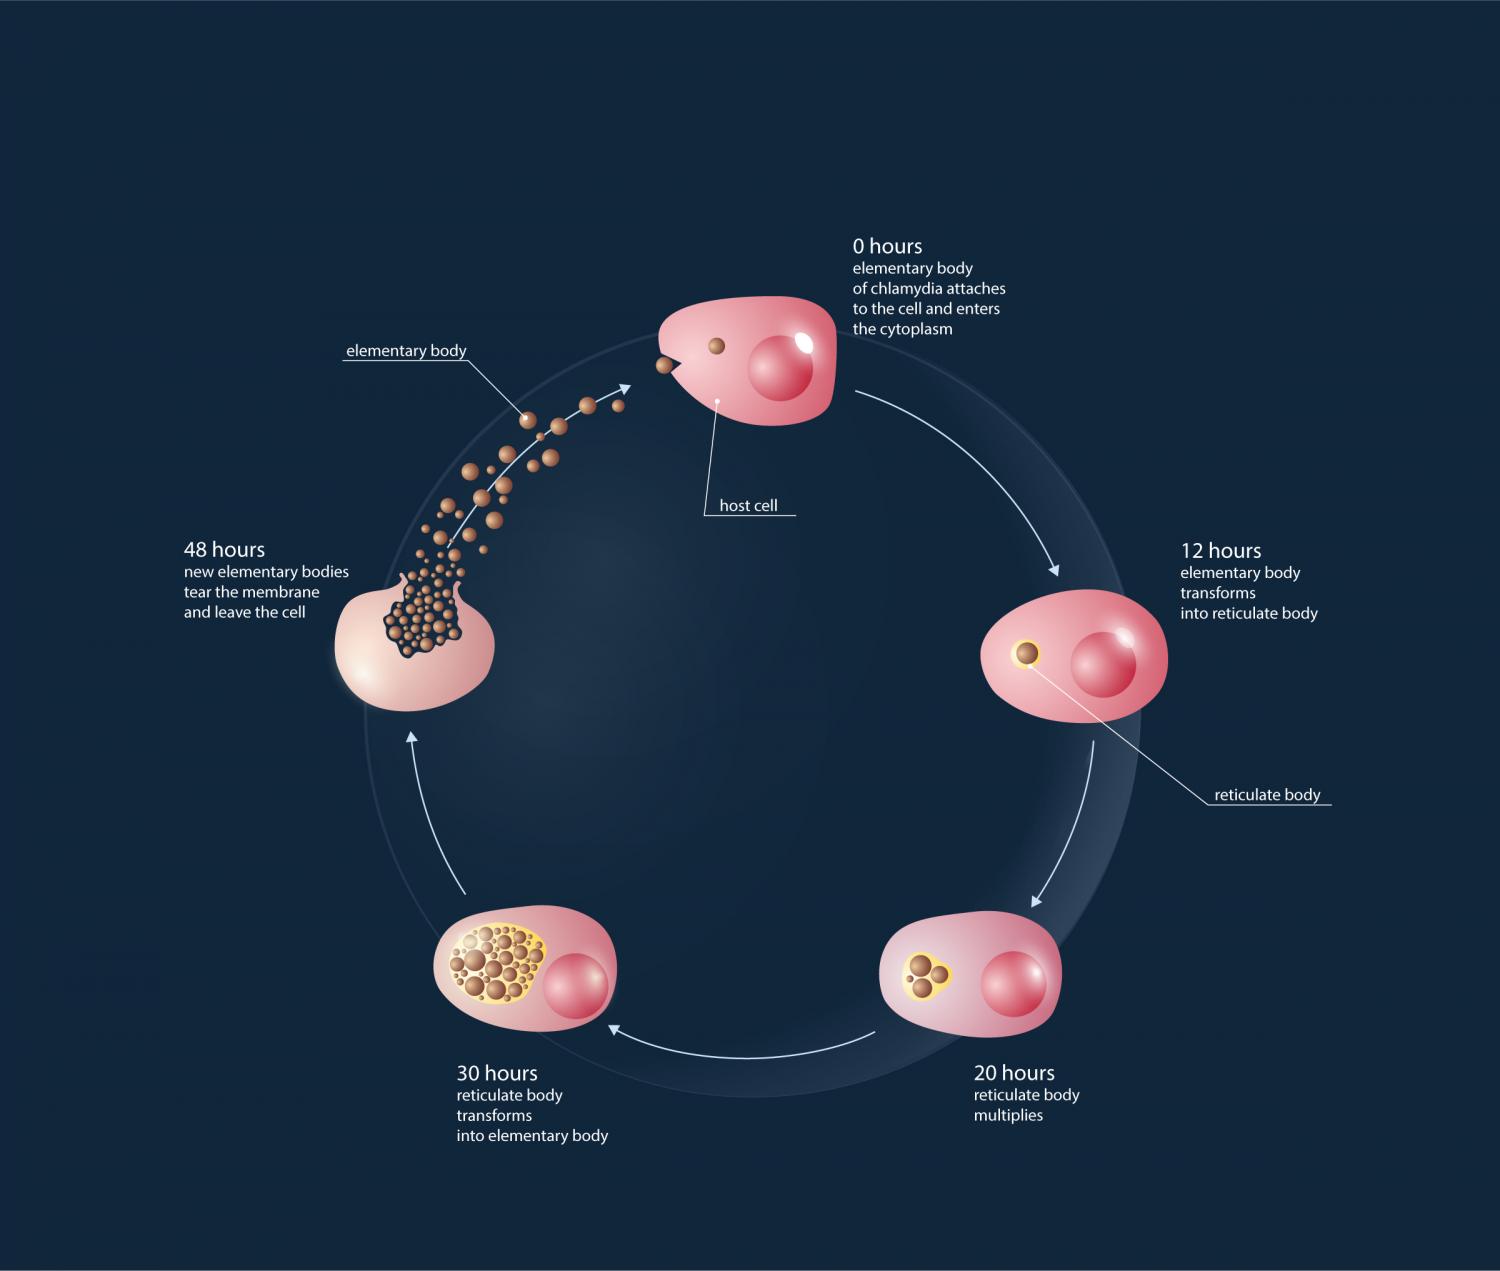 Infographic: How Chlamydia Evades Immune Detection, TS Digest